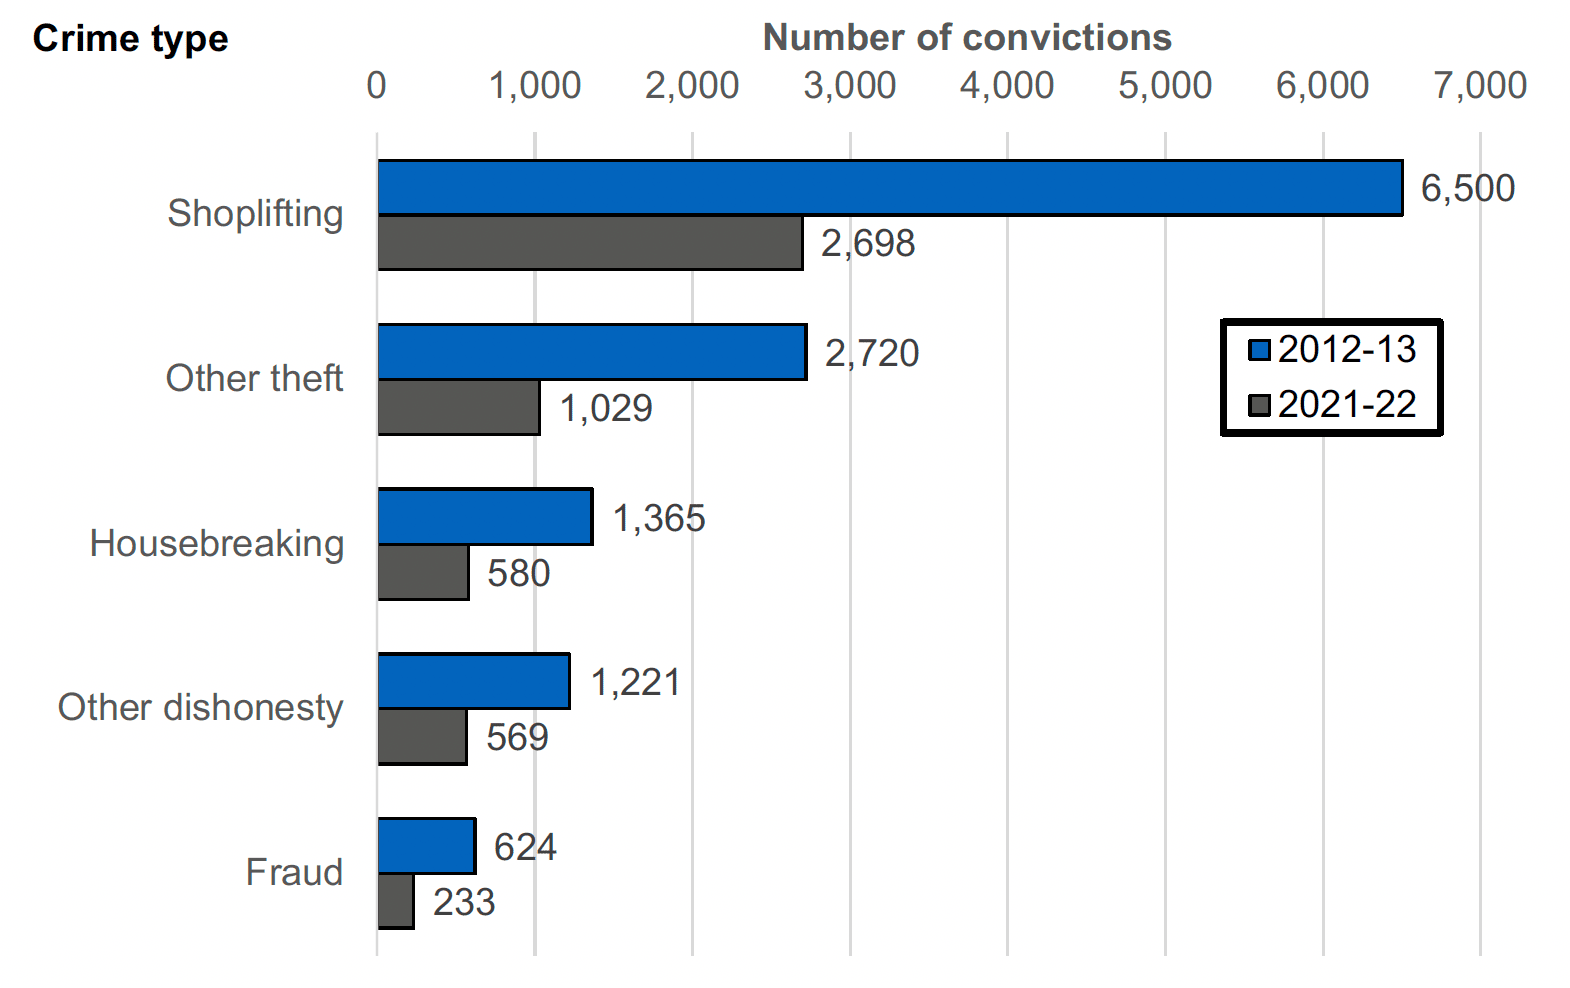 A clustered bar chart comparing number of convictions for common types of Crimes of dishonesty comparing the two years 2012-13 and 2021-22. For each crime, there were more than double the number of convictions in 2012-13 compared to 2021-22. Shoplifting was the most common, with 6,500 convictions in 2012-13 compared to 2,698 in 2021-22.